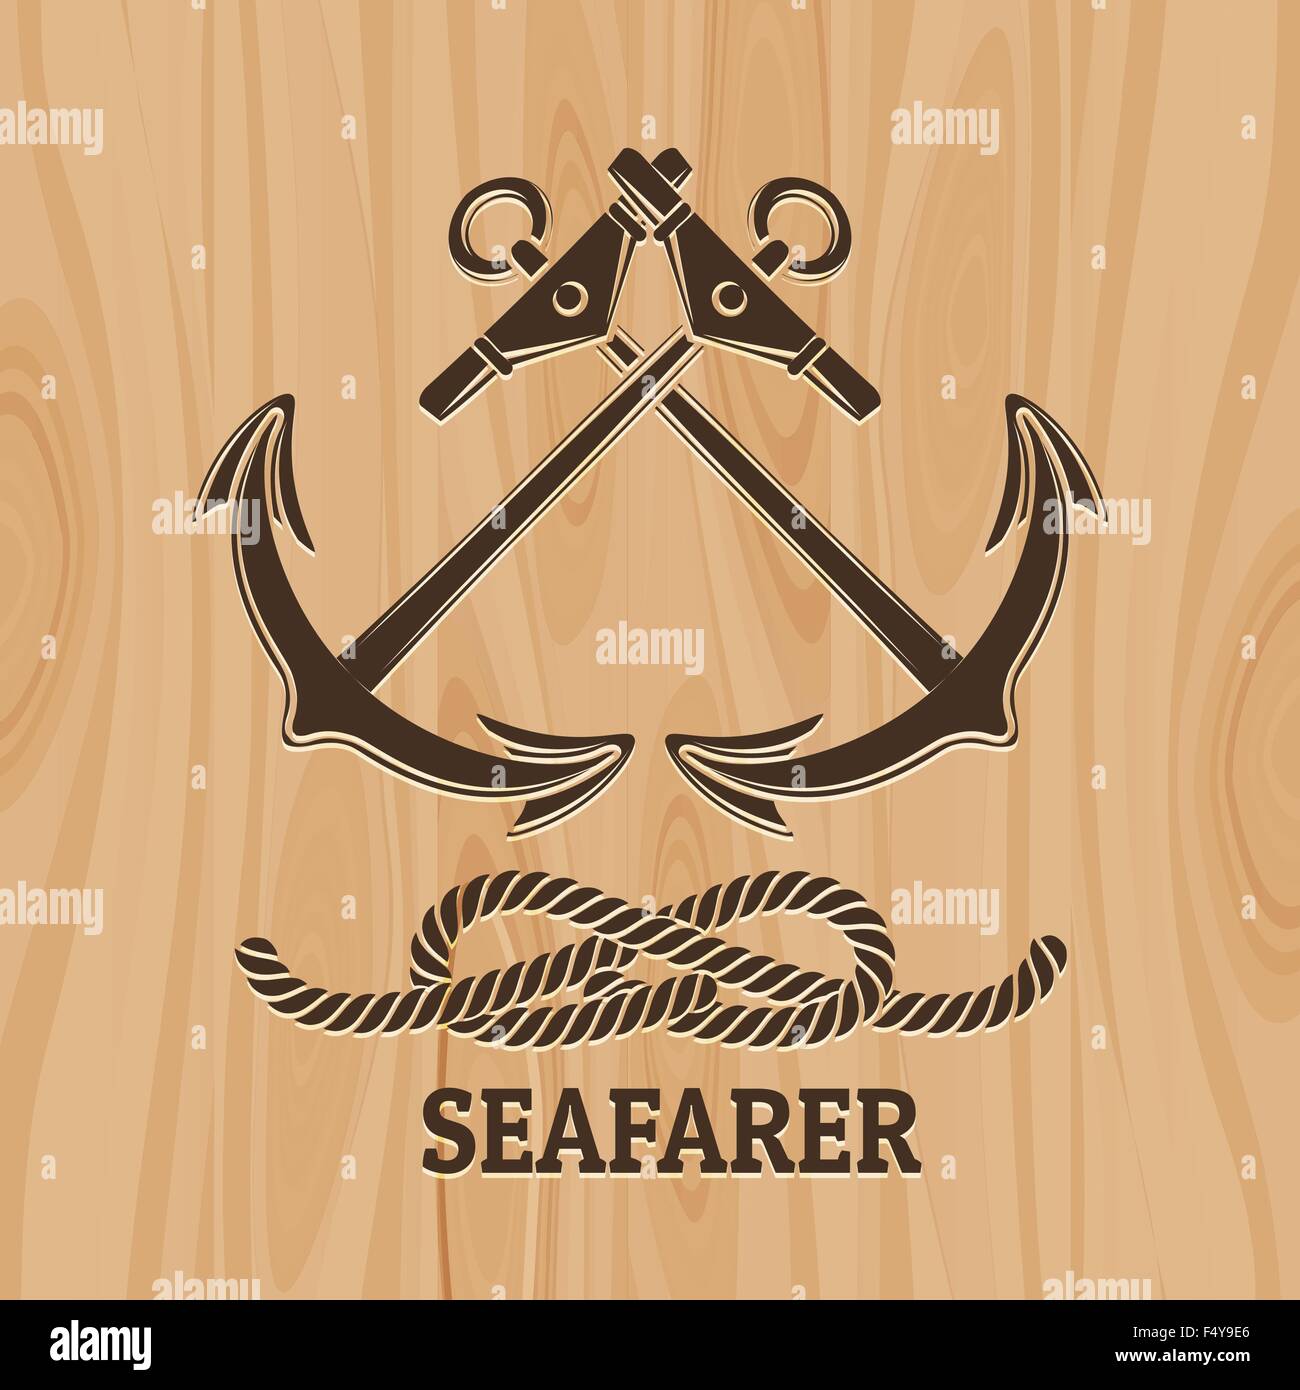 Crossed Anchor and Rope Knot. Nautical emblem with lettering Seafarer. Illustration in spirographic style. Free Font used. Stock Vector